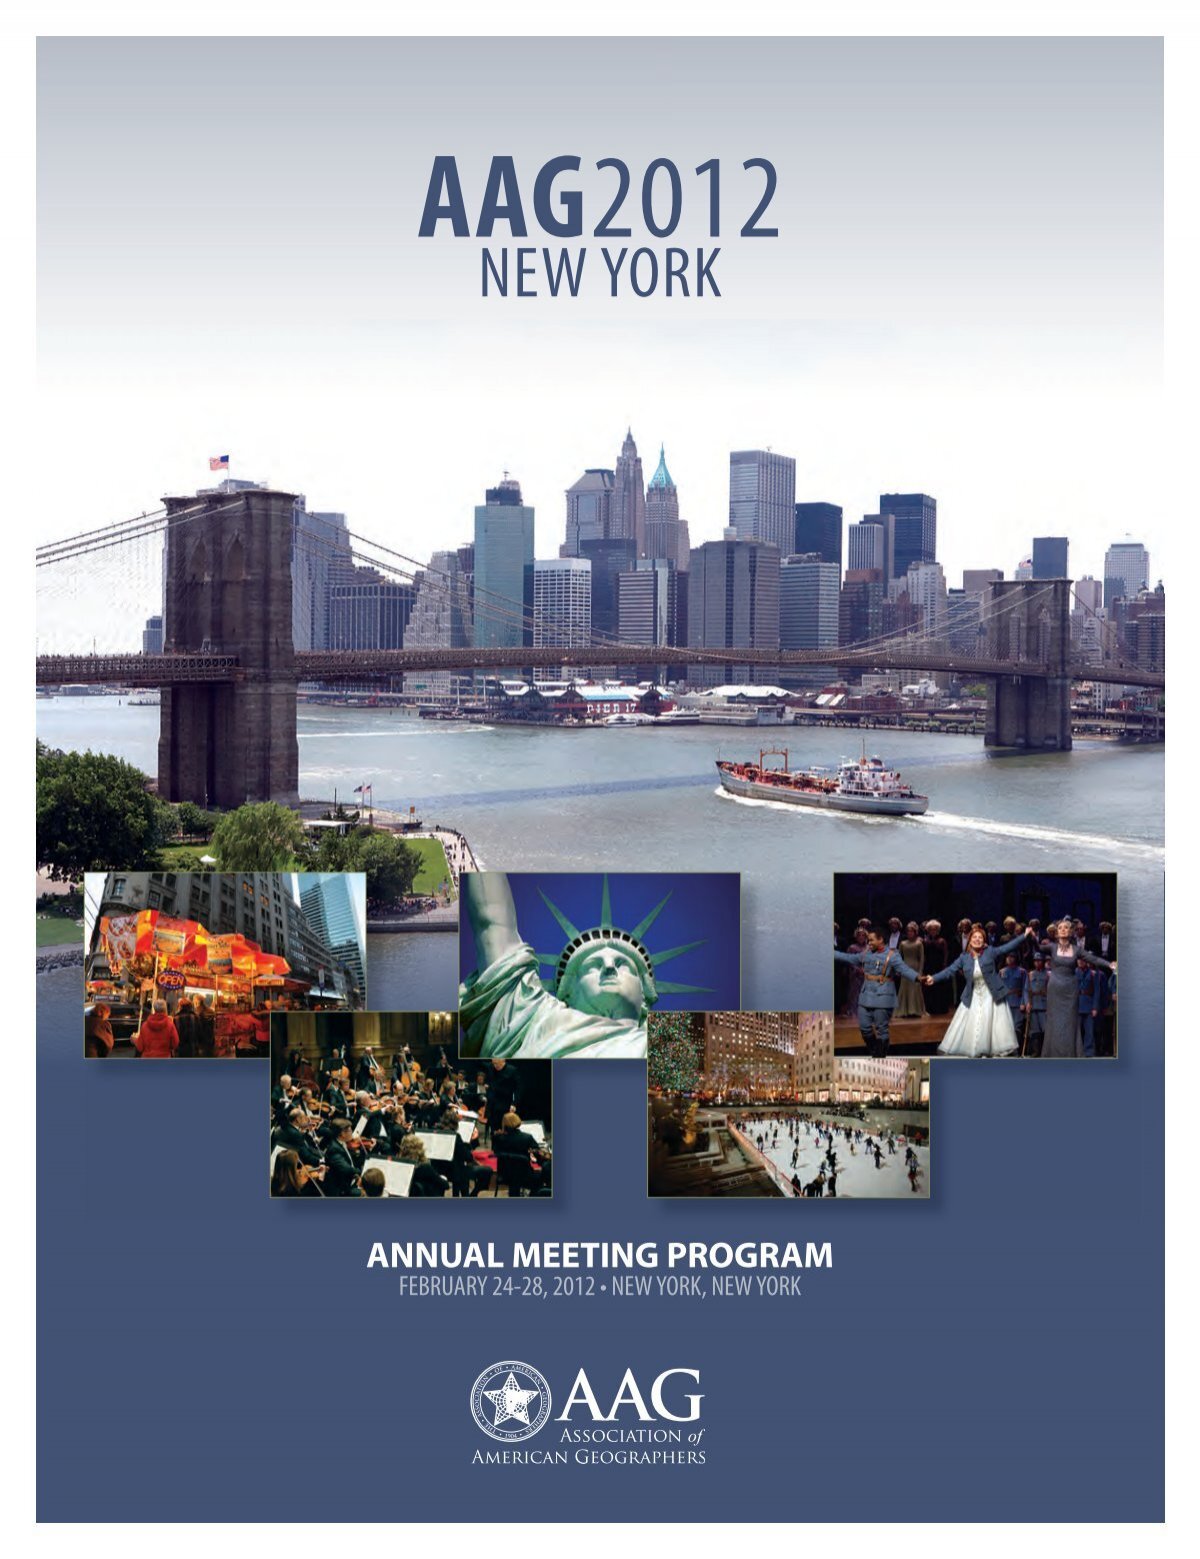 Aag2012 Association Of American Geographers Images, Photos, Reviews